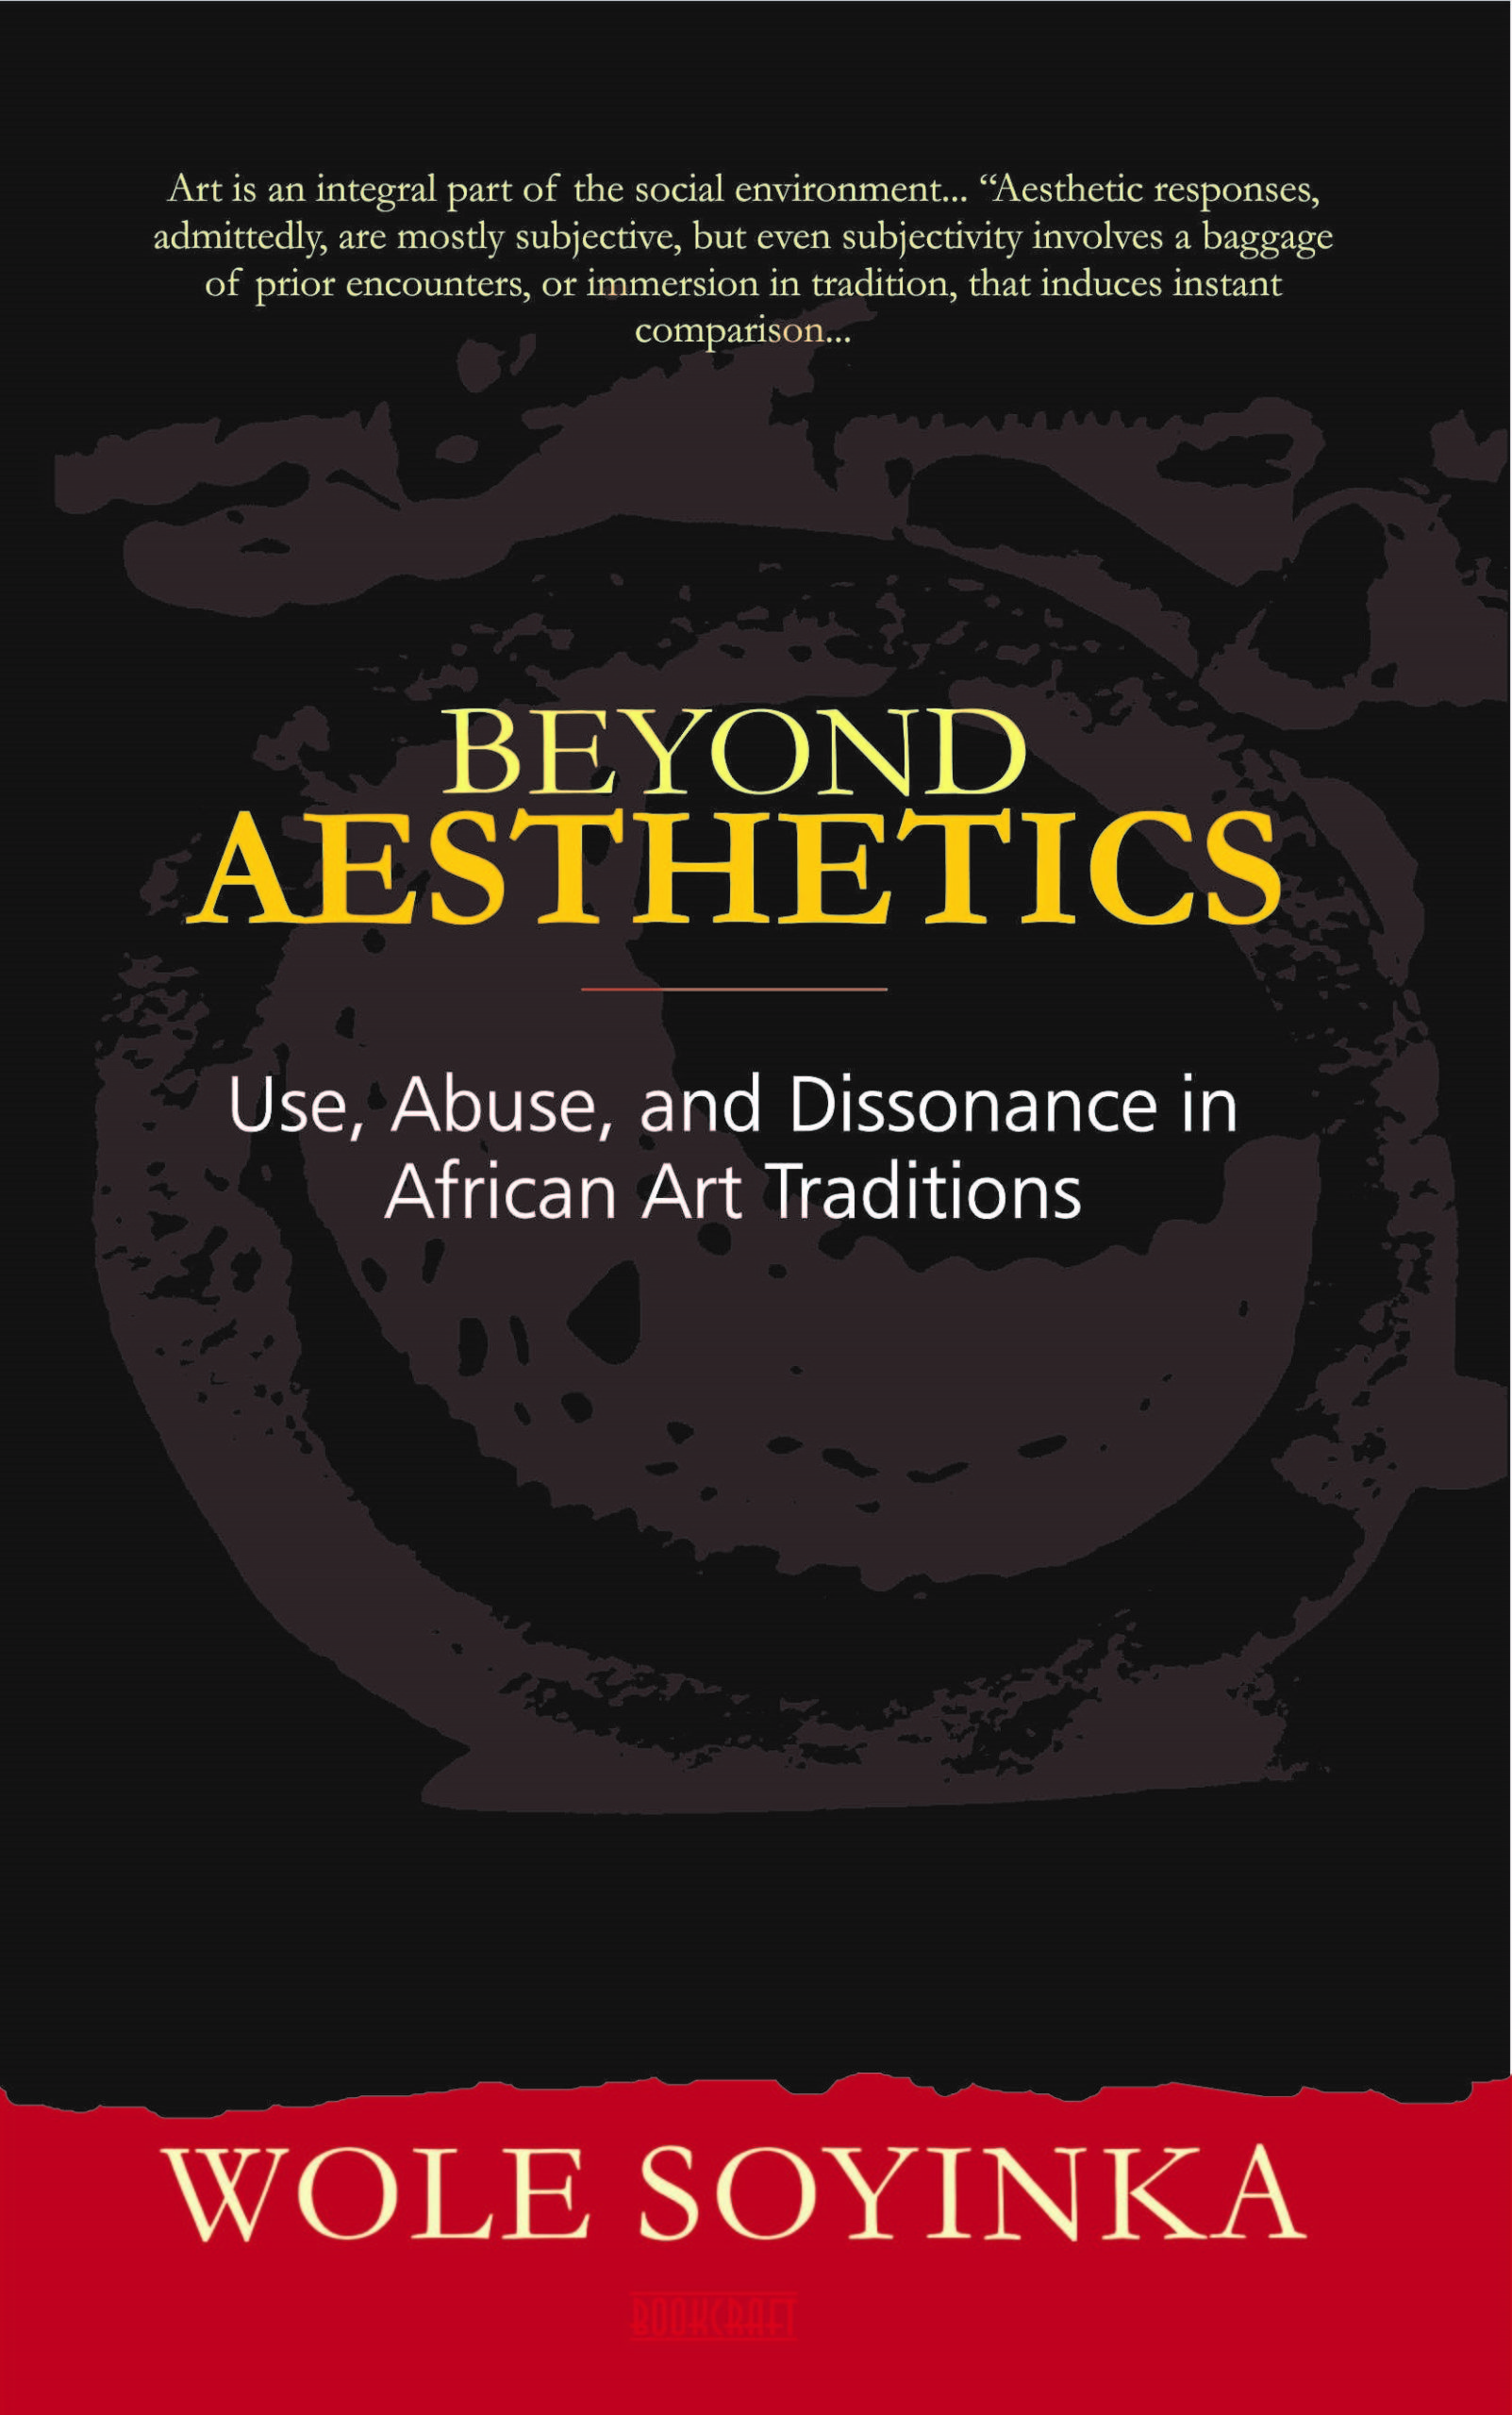 NEW RELEASE — Beyond Aesthetics: Use, Abuse, and Dissonance in African Art Traditions by Wole Soyinka